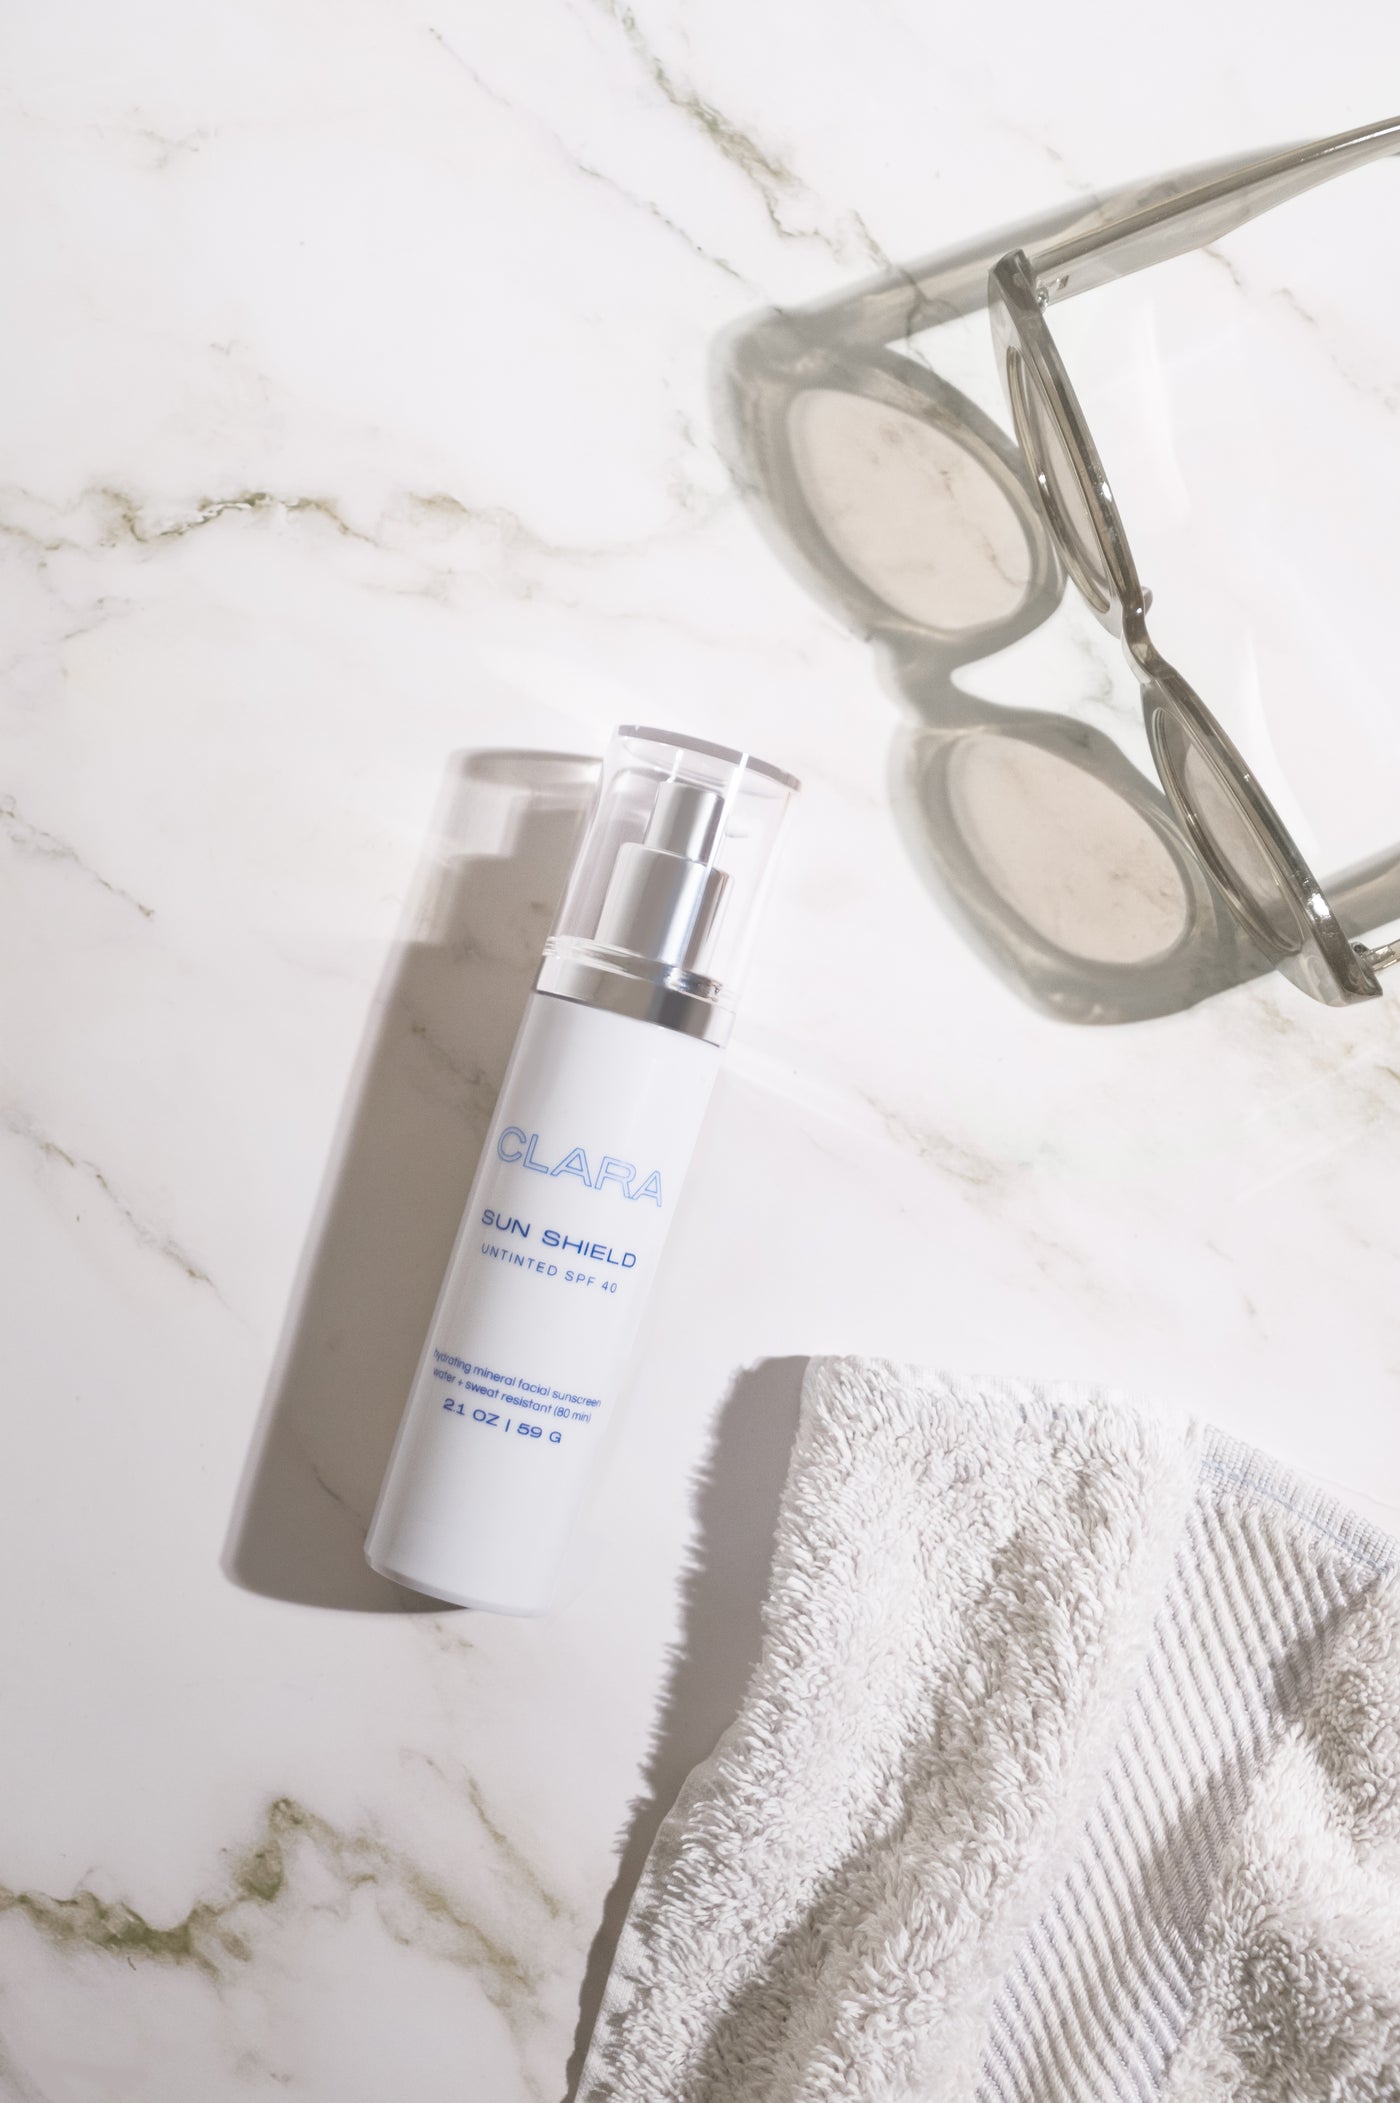 Sun Shield Sunscreen: 100% mineral sunscreen shields skin from UVA and UVB rays with broad-spectrum protection, bioflavenoids and glycoproteins sooth and revitalize the skin and dimethicone creates a silky, smooth finish